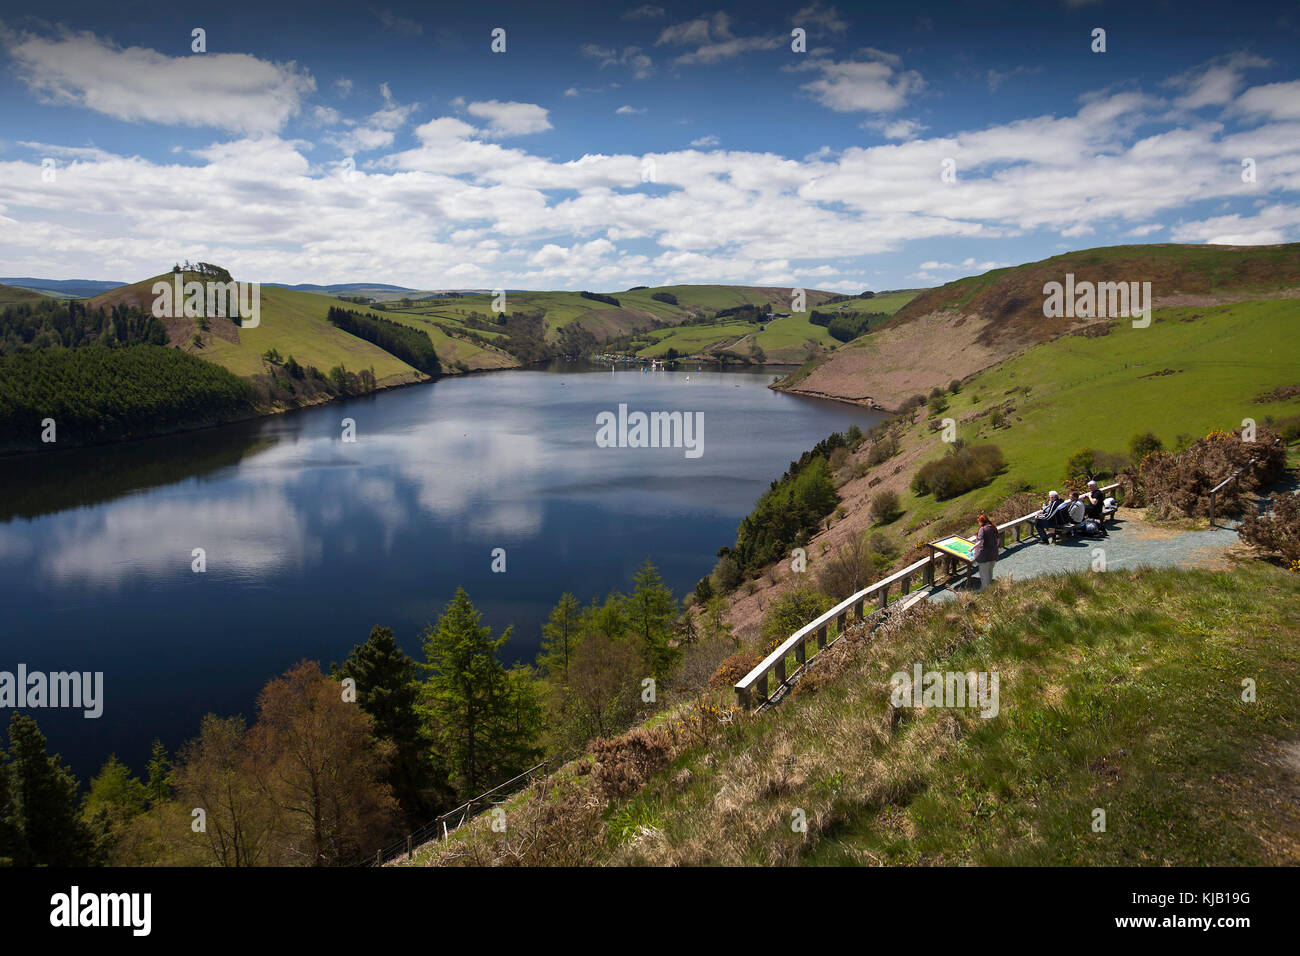 Viewpoint with visitors overlooking spectacular vista of Clywedog Reservoir, Wales, UK Stock Photo